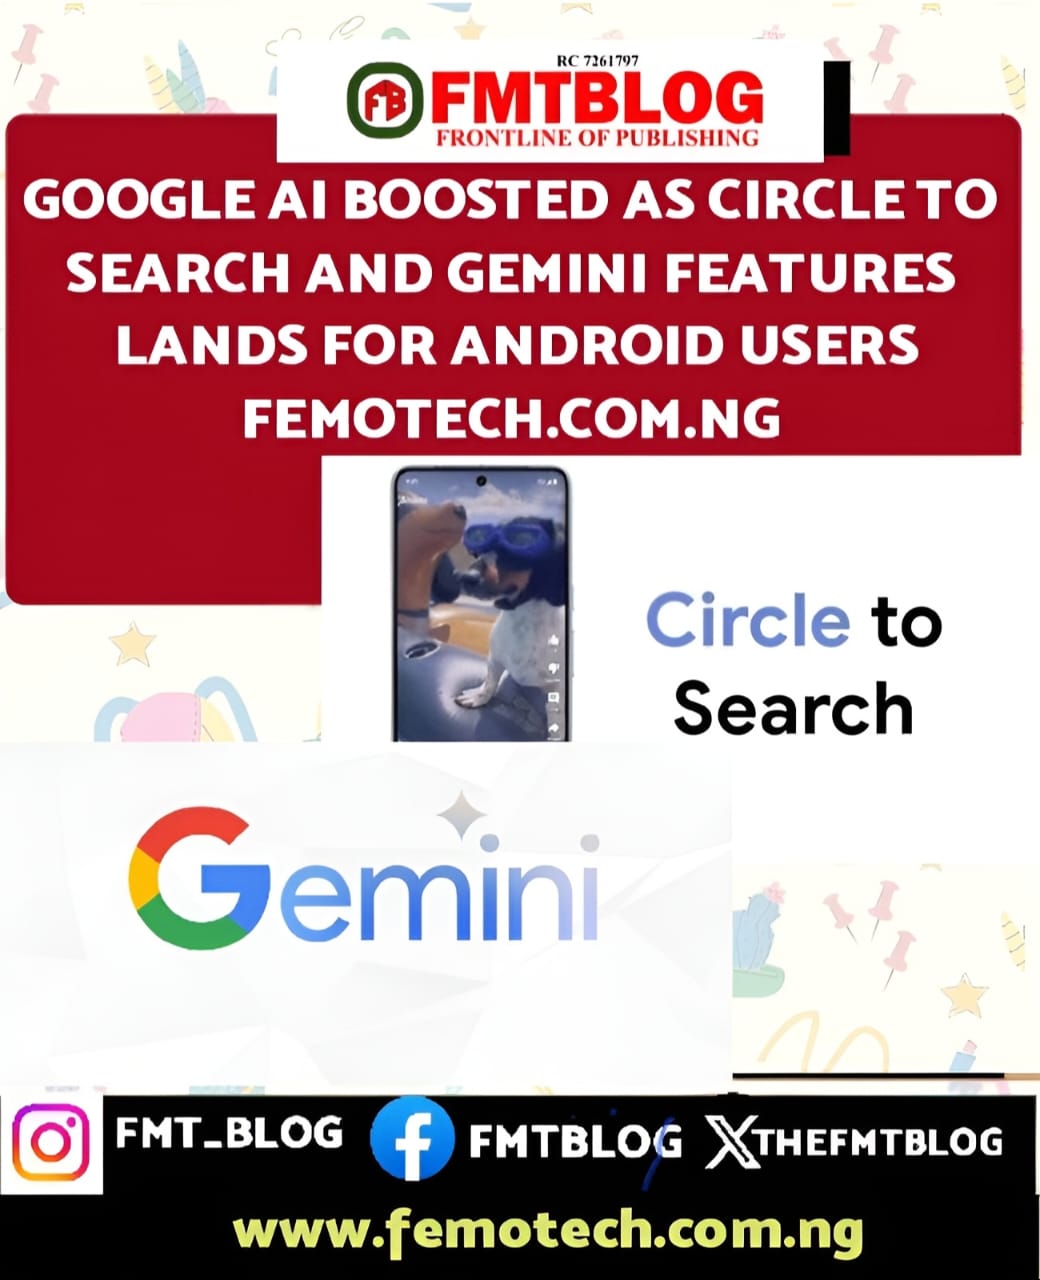 Google AI Boosted As Circle To Search And Gemini Features Lands For Android Users  